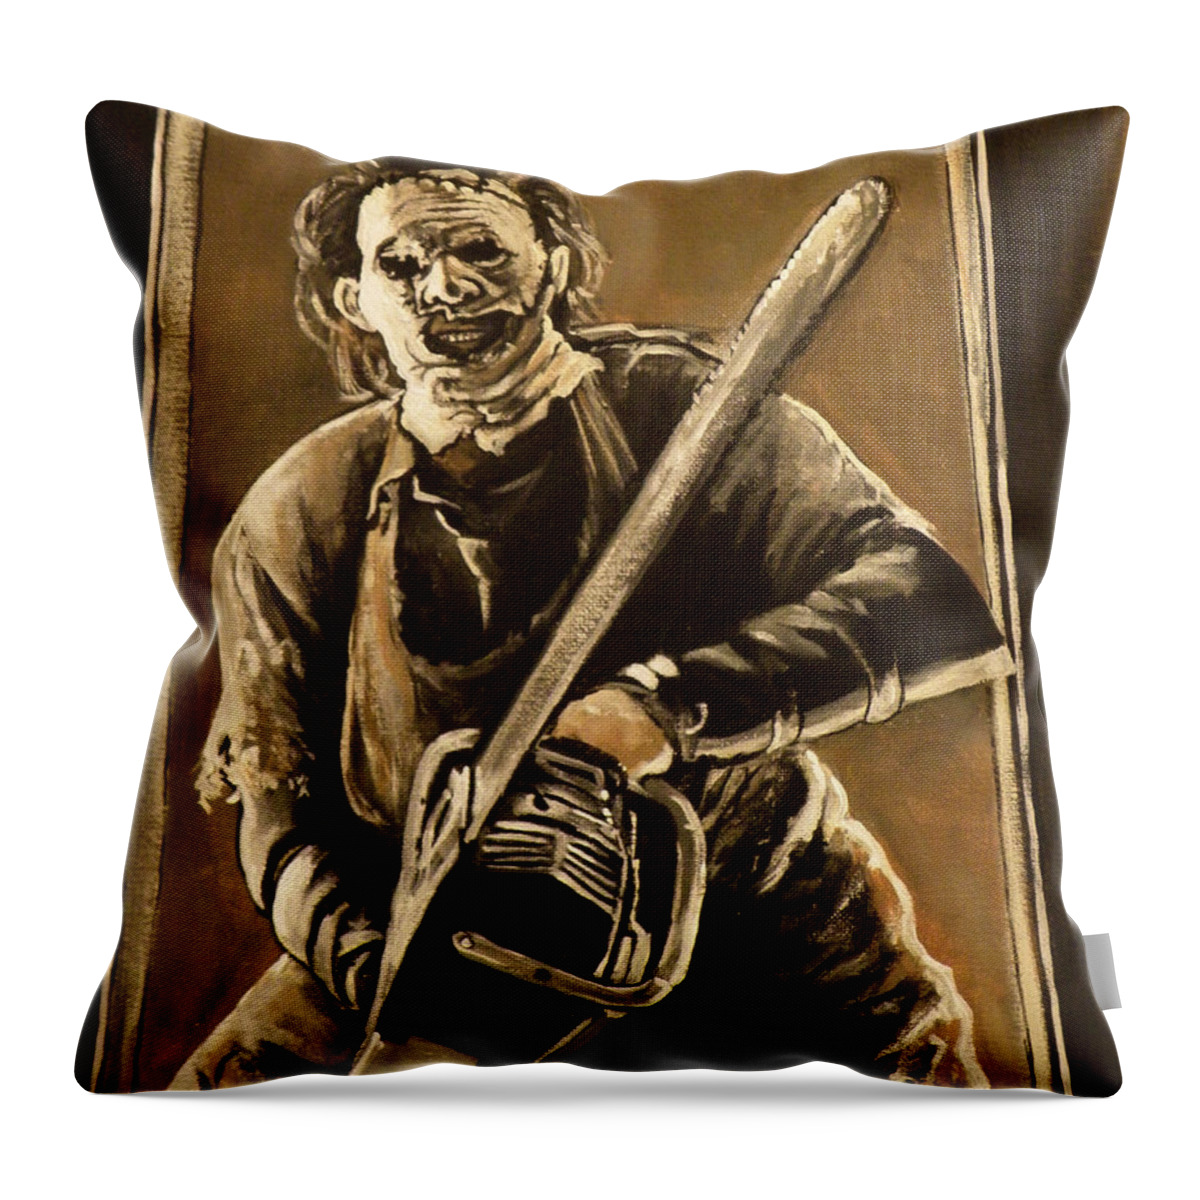 Texas Chainsaw Massacre Throw Pillow featuring the painting Leatherface by Tom Carlton